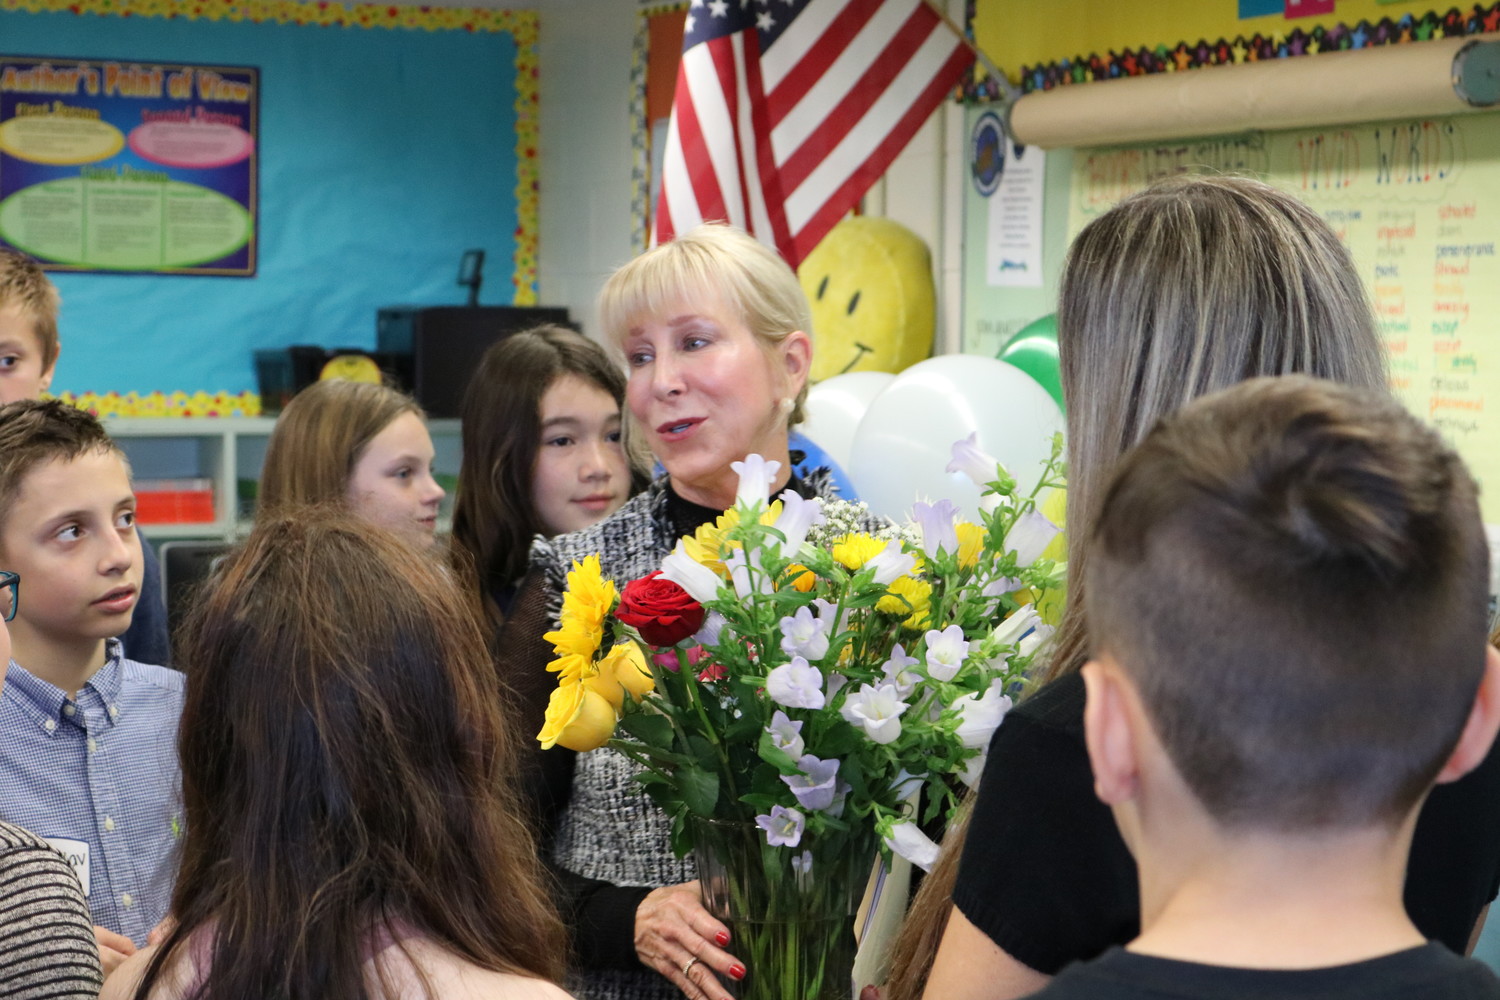 PVPV-Rawlings Elementary School students show their appreciation to First Lady Ann Scott by giving her a bouquet of flowers.